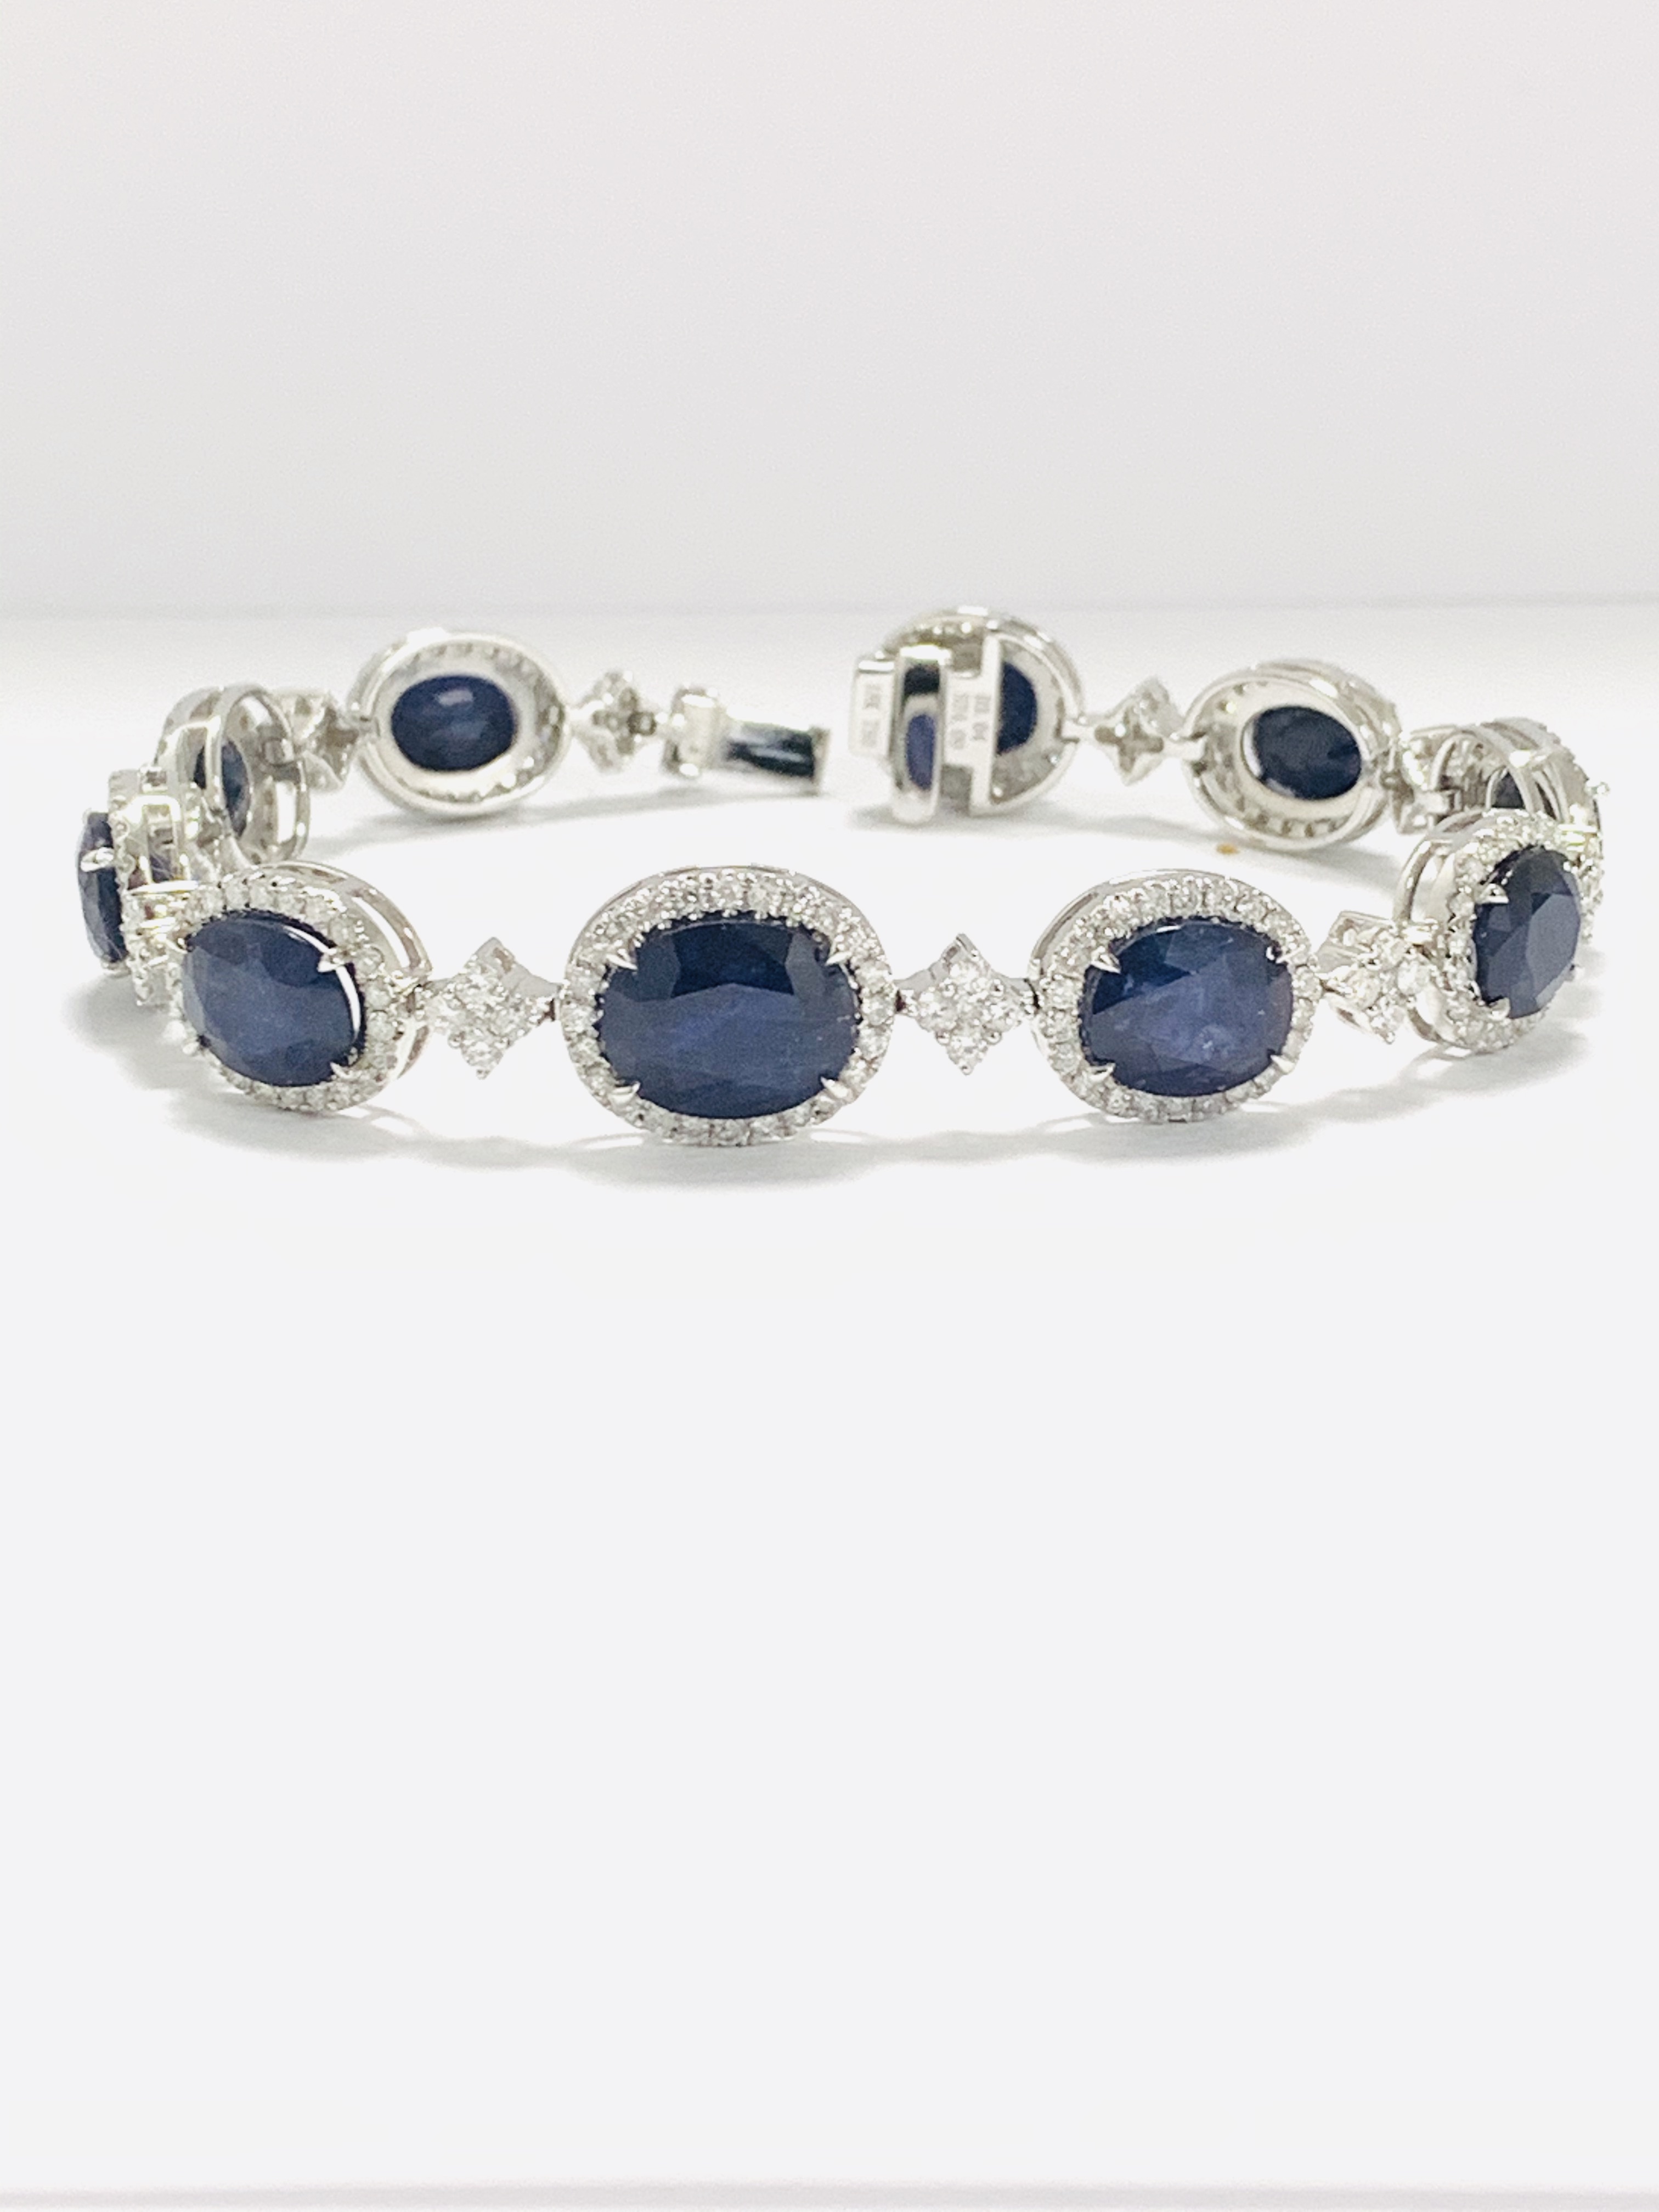 18ct White Gold Sapphire and Diamond bracelet featuring, 10 oval cut, dark blue Kashmir Sapphires (2 - Image 2 of 21